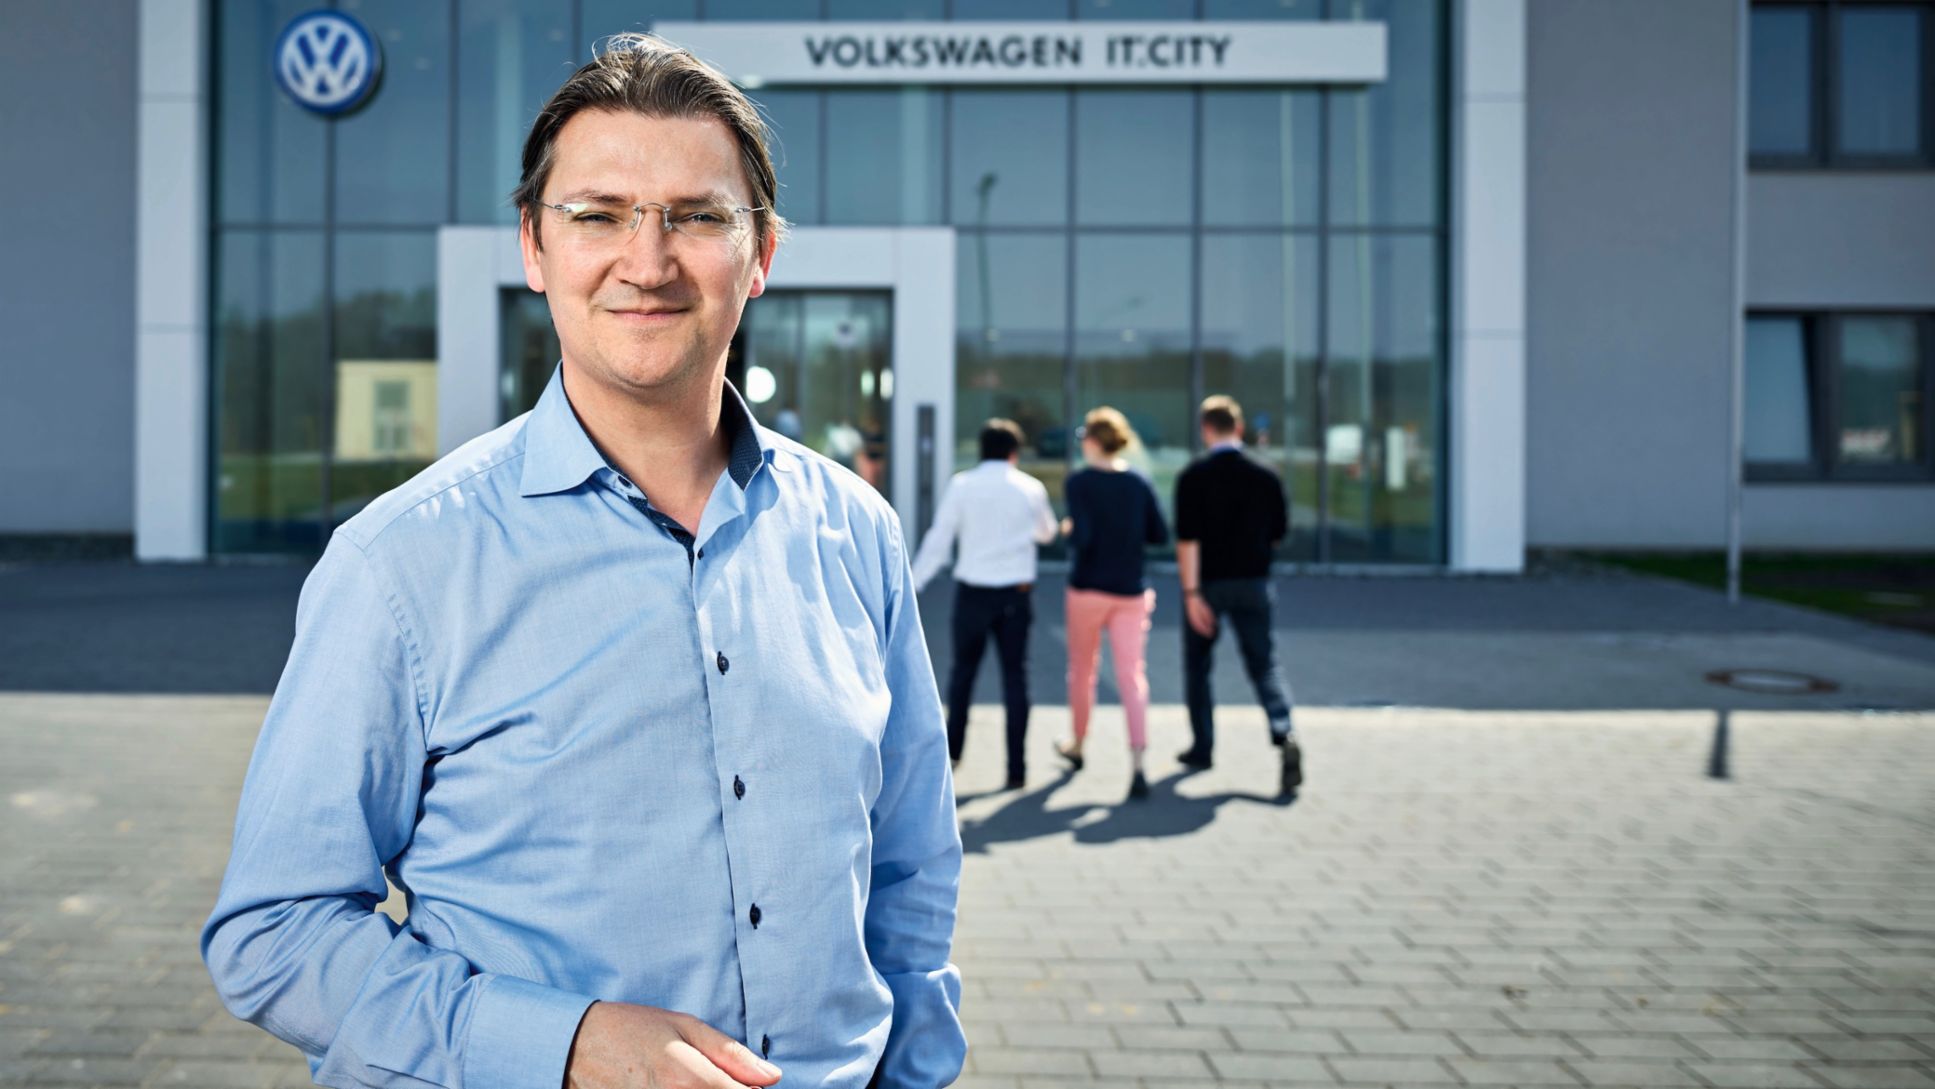 Interview with Johann Jungwirth, Head of Mobility Services at the Volkswagen Group, 2018, Porsche AG